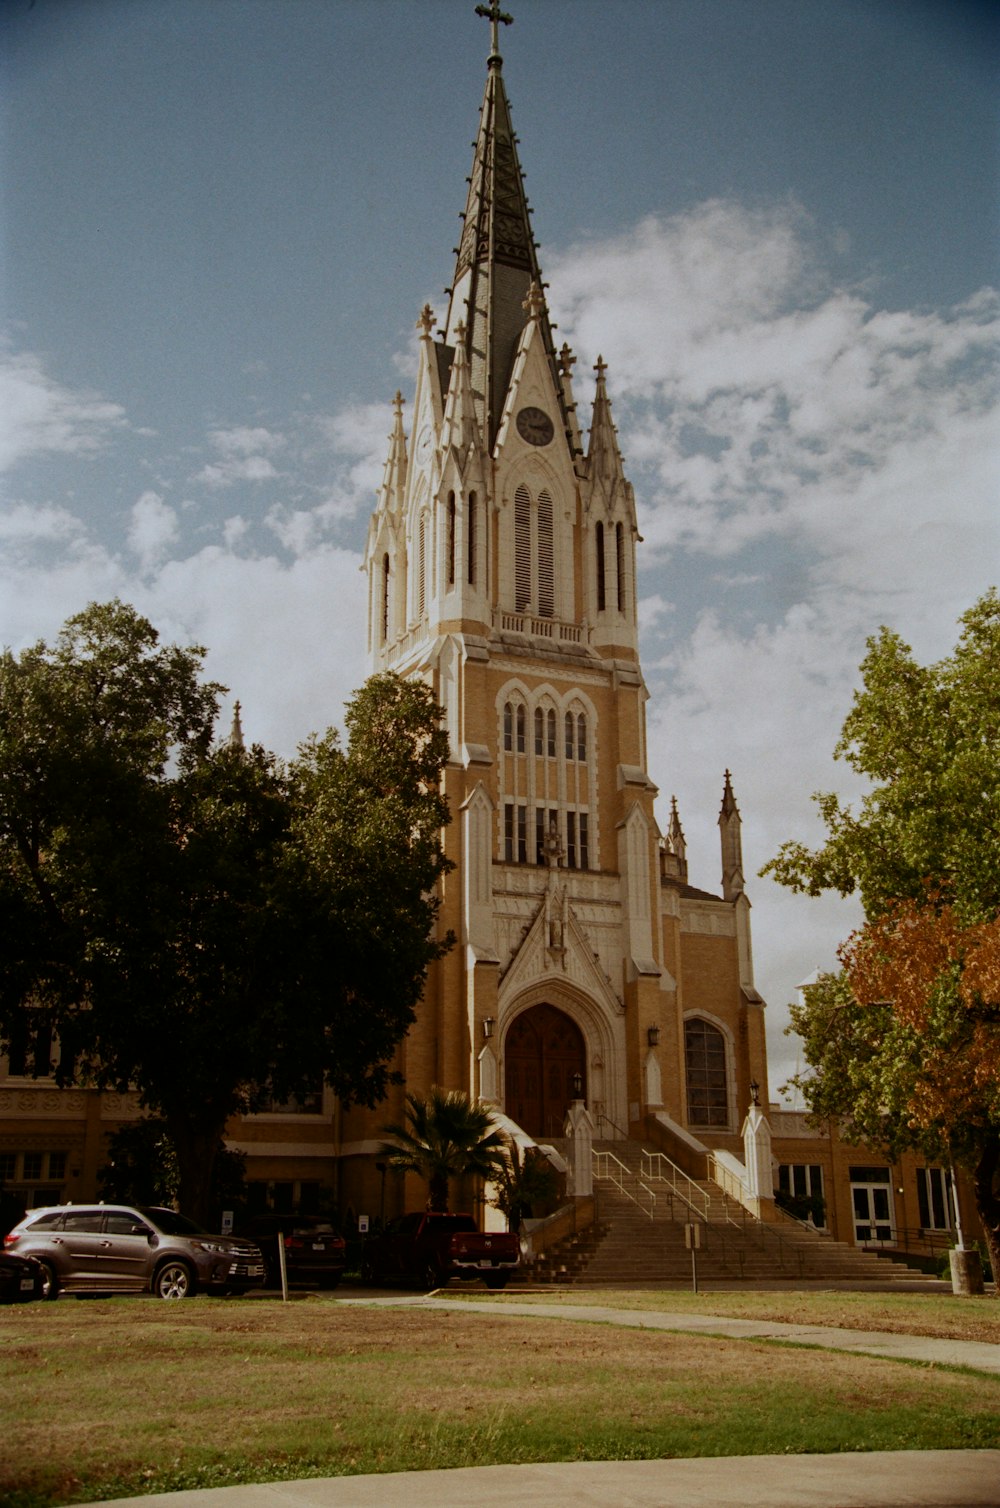 a large church with a steeple and a clock tower